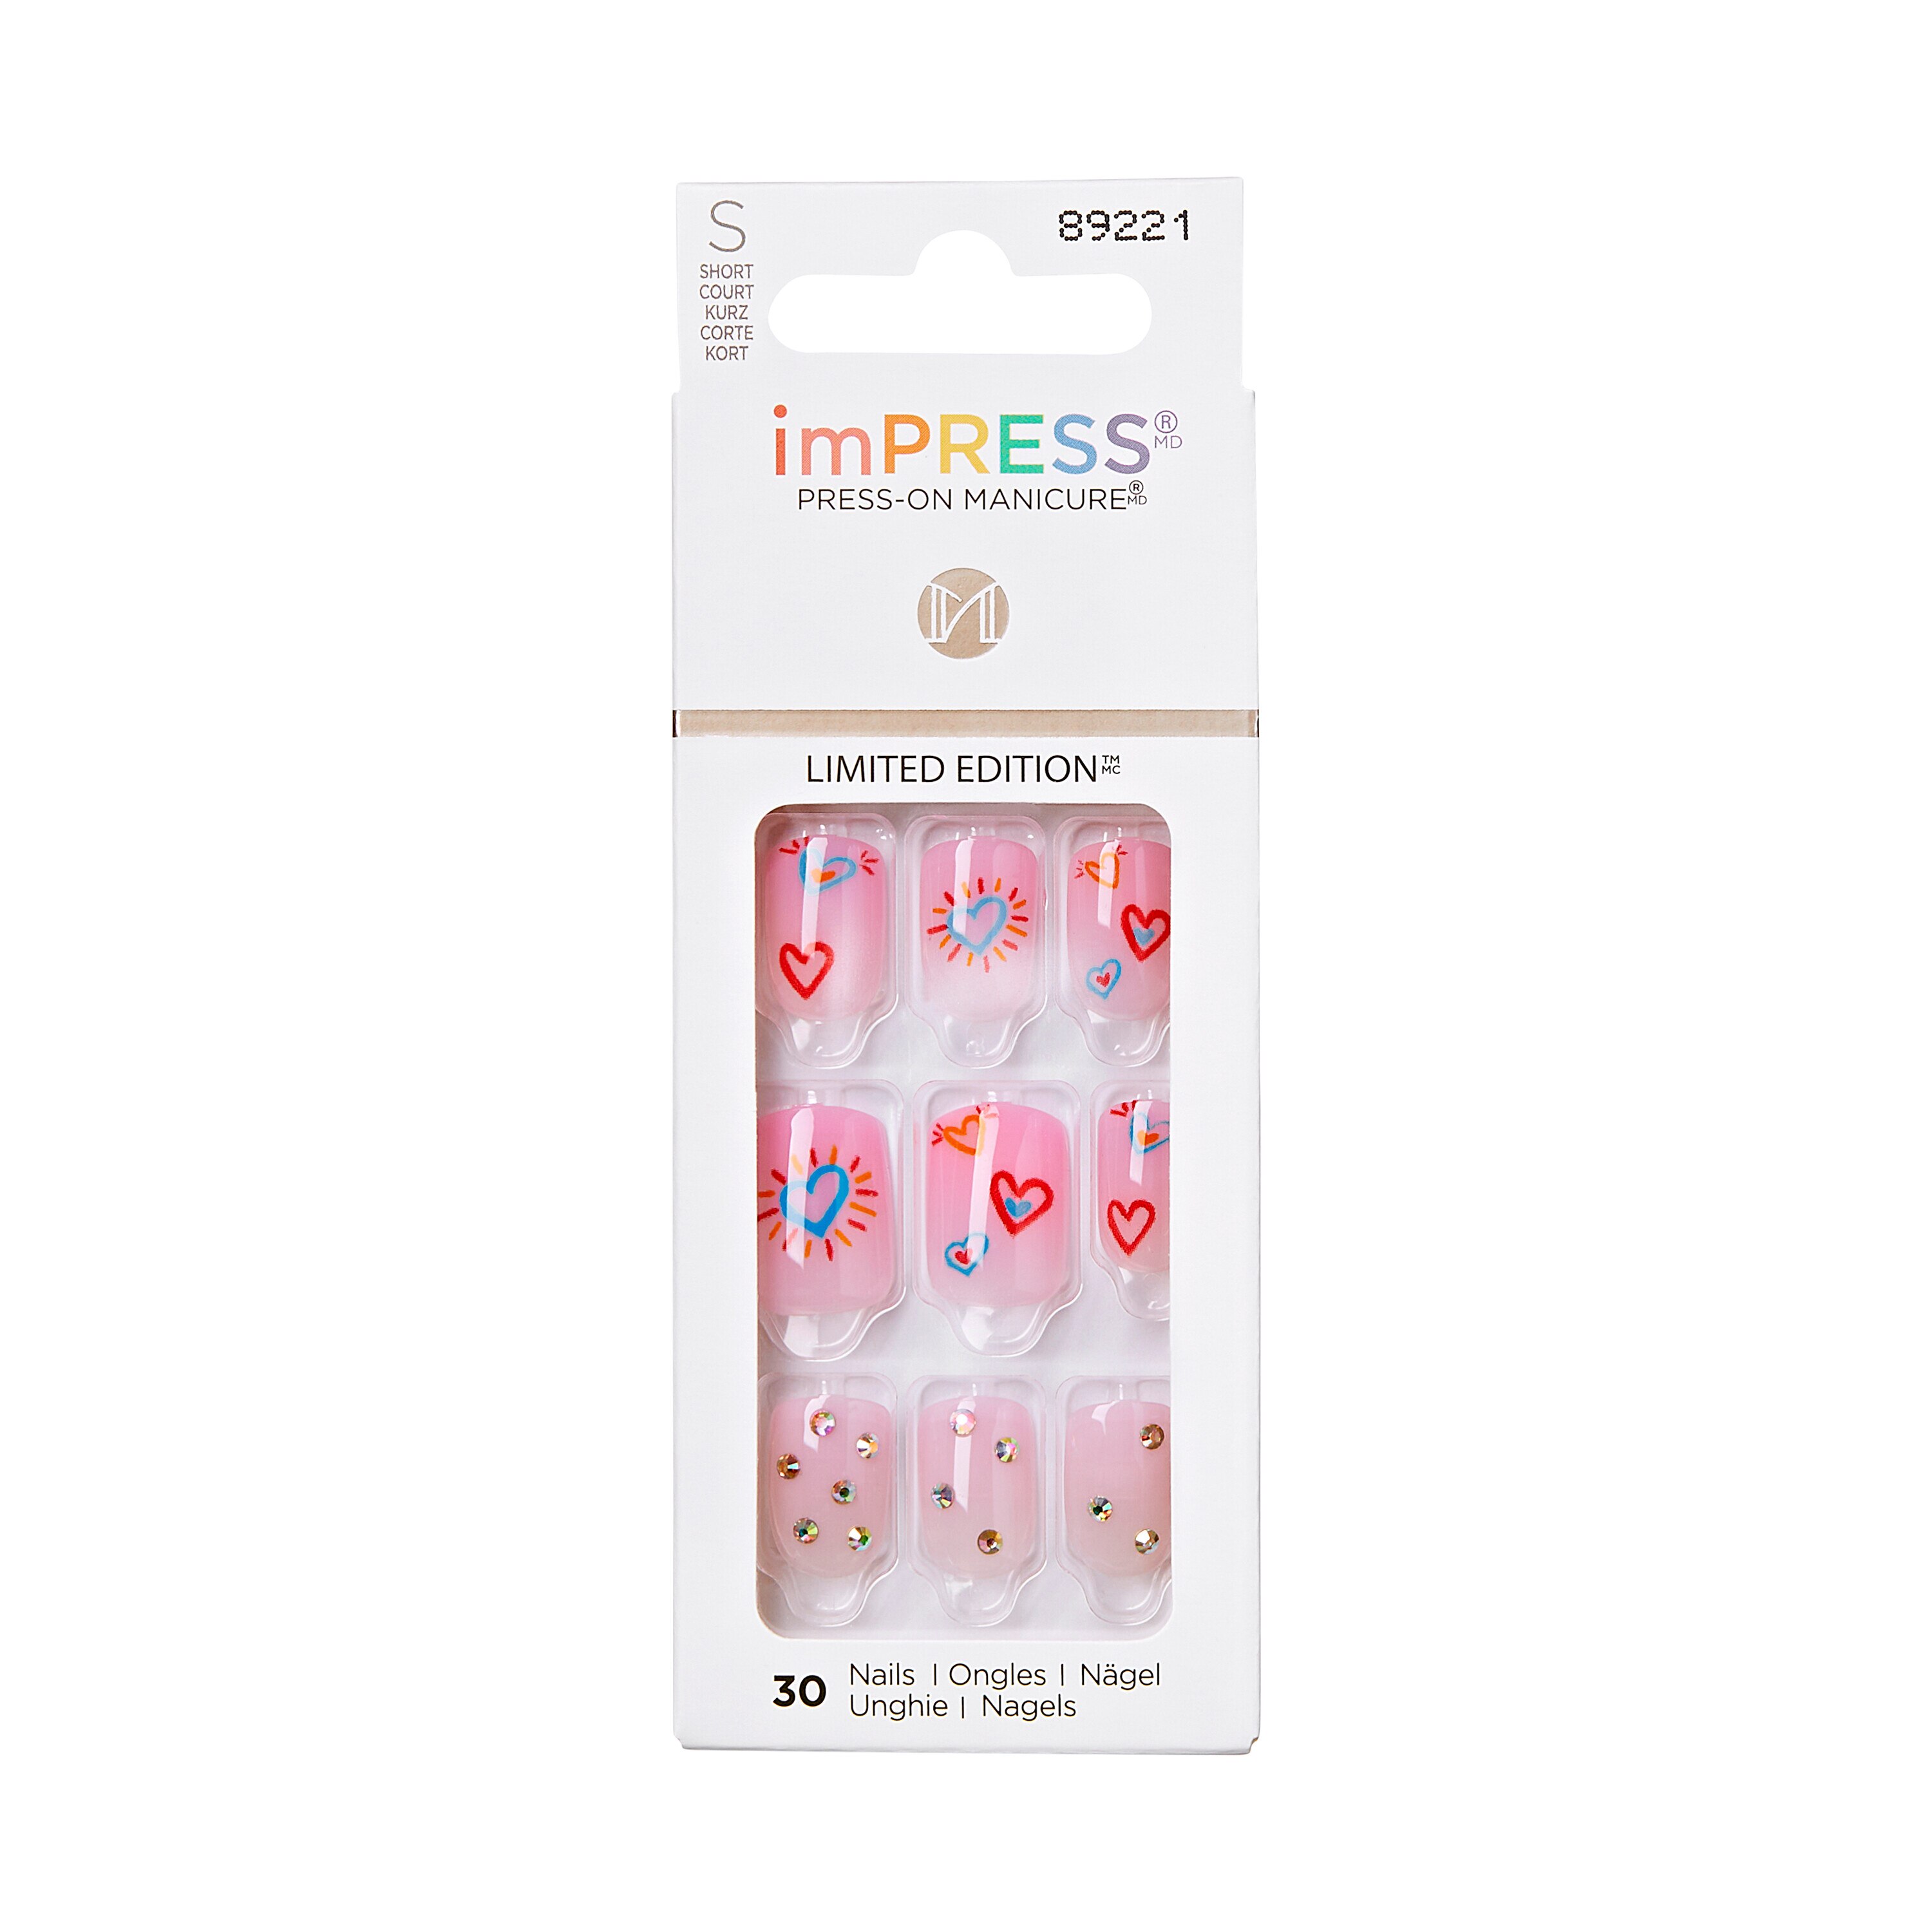 imPRESS Press-On Manicure Limited Edition Pride Nails, Pink, Short ...